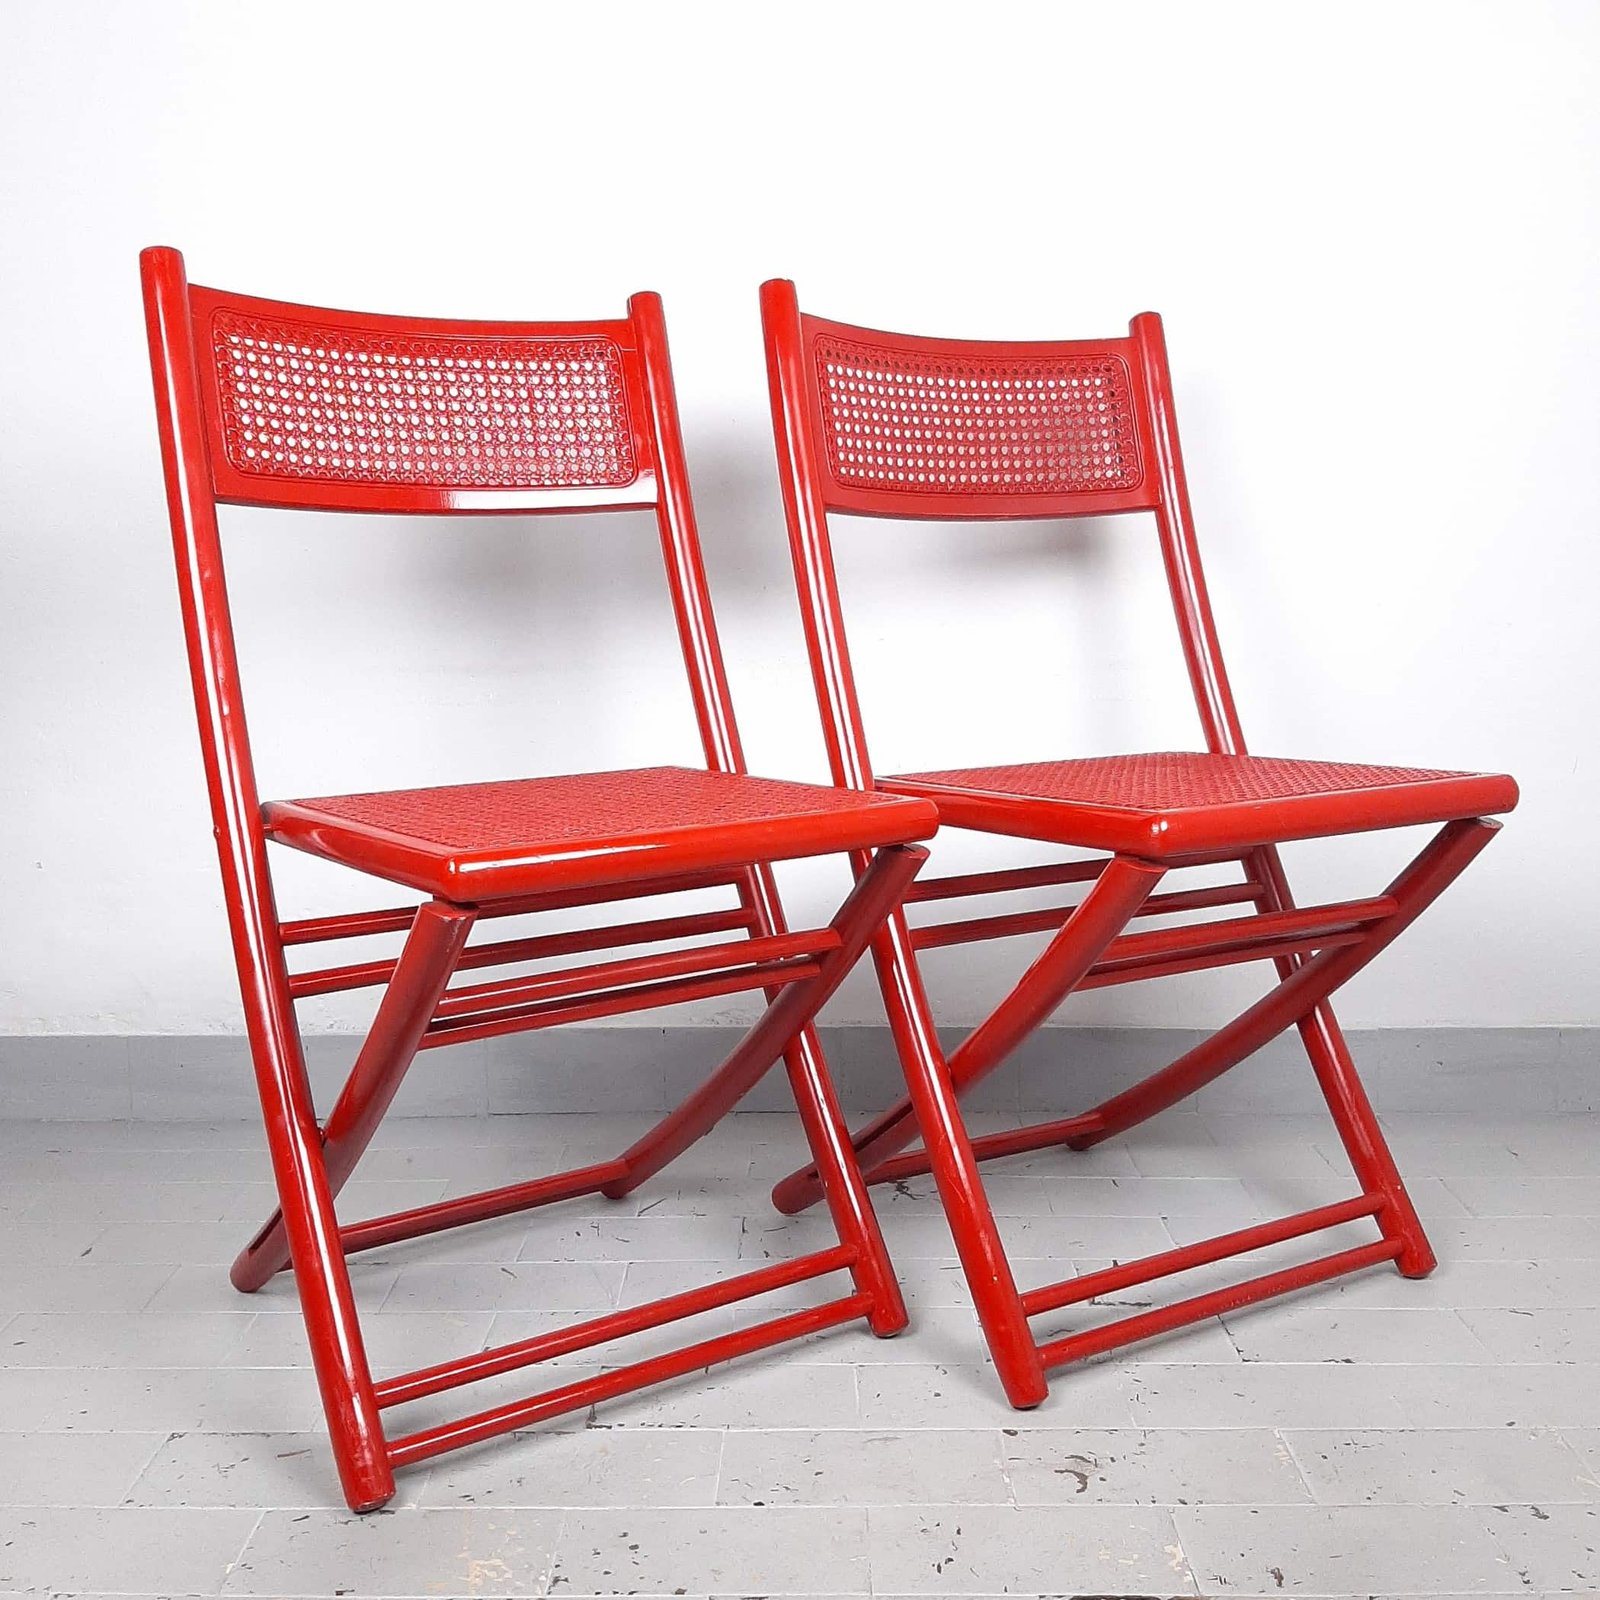 1 of 2 Retro red folding chair with rattan seat Italy 70s Mid-century wooden furniture